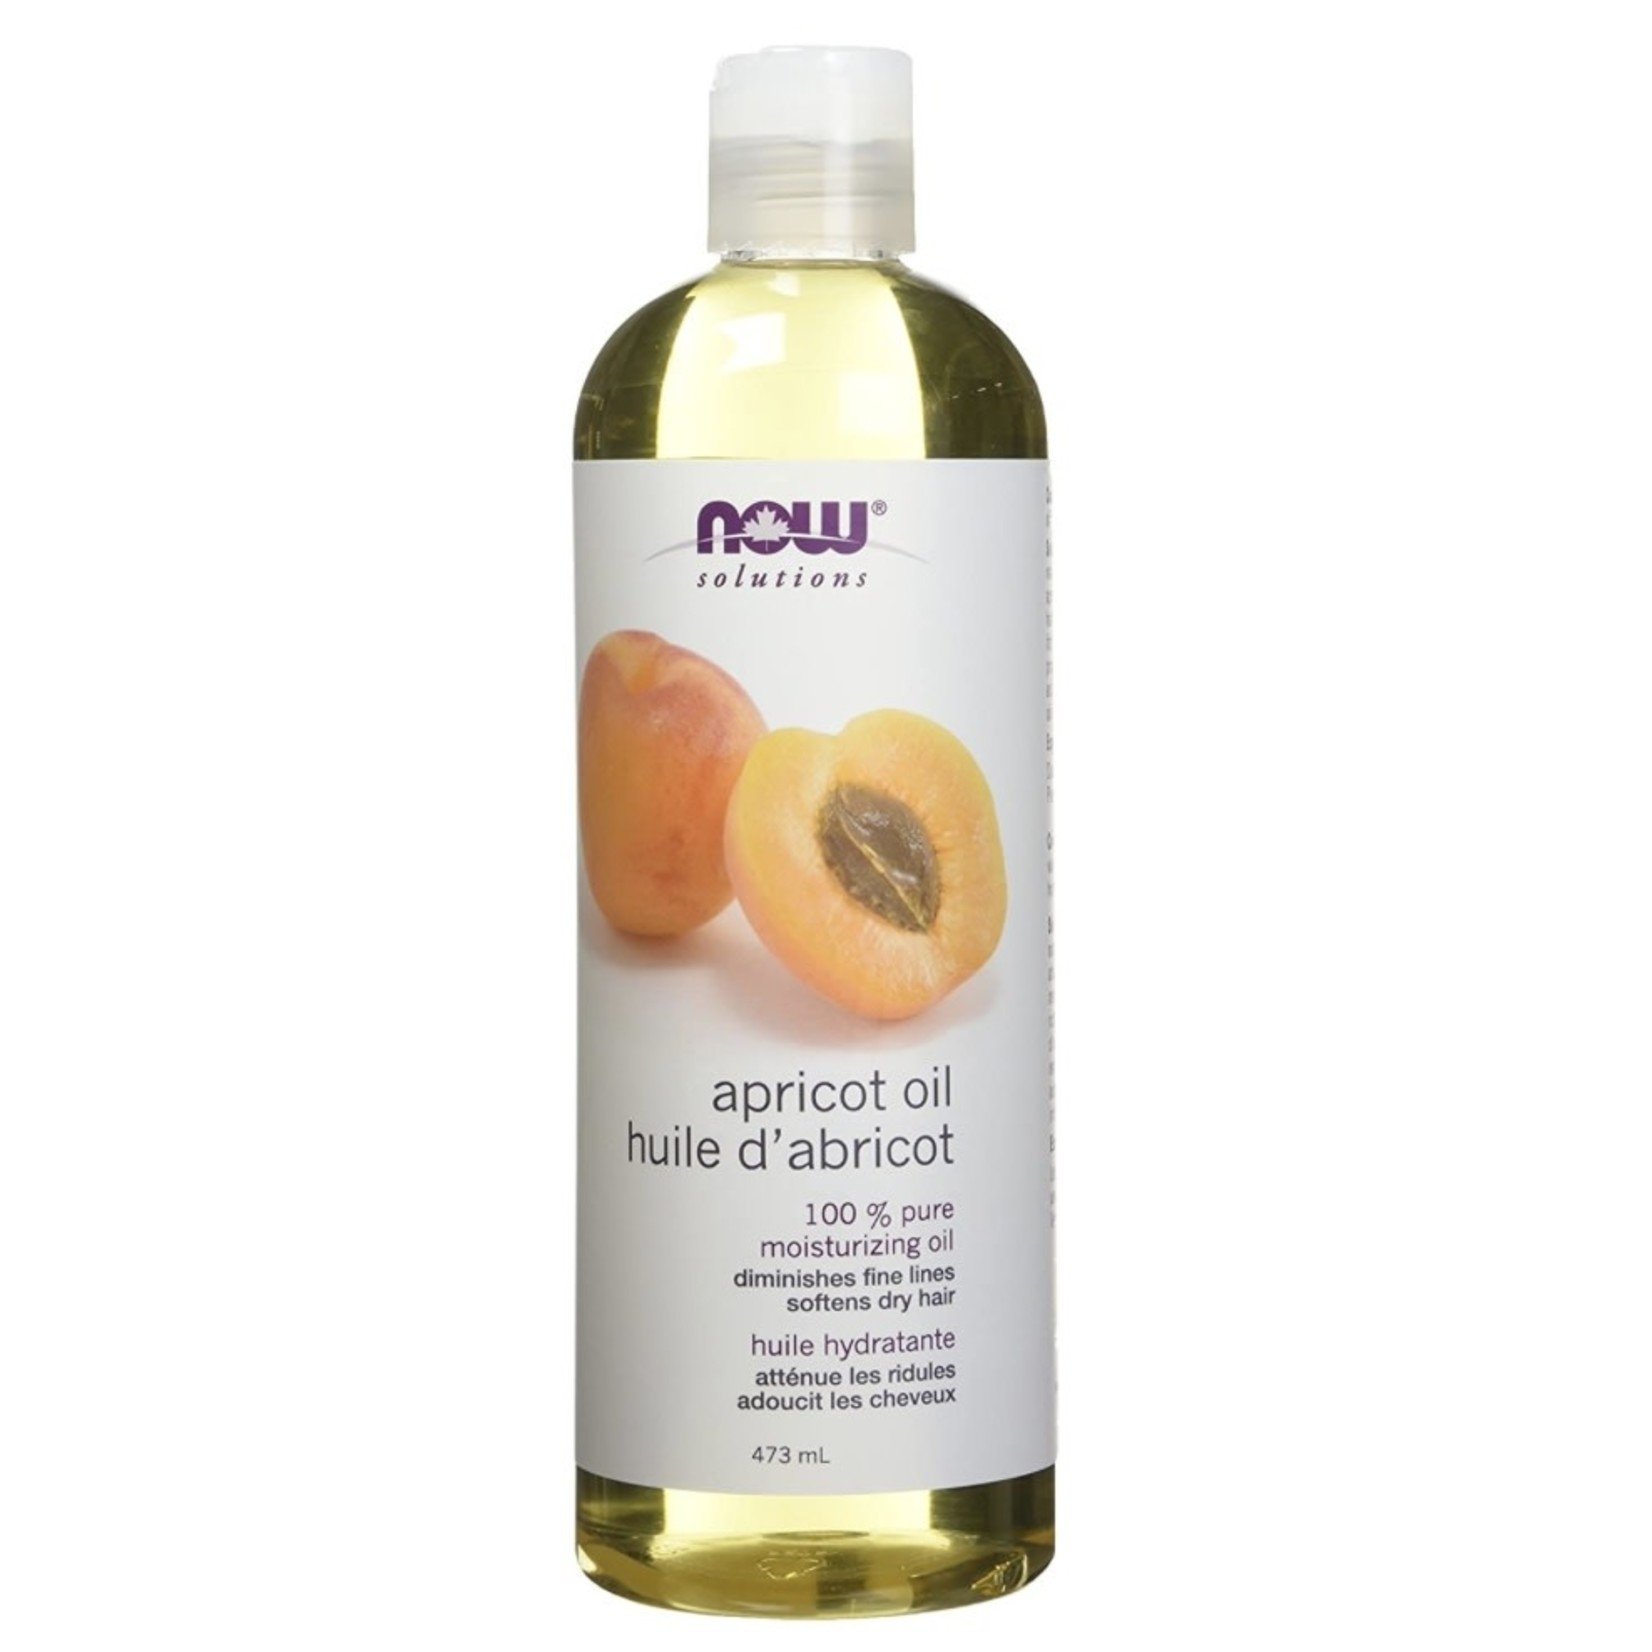 Now Now Apricot Oil 473ml